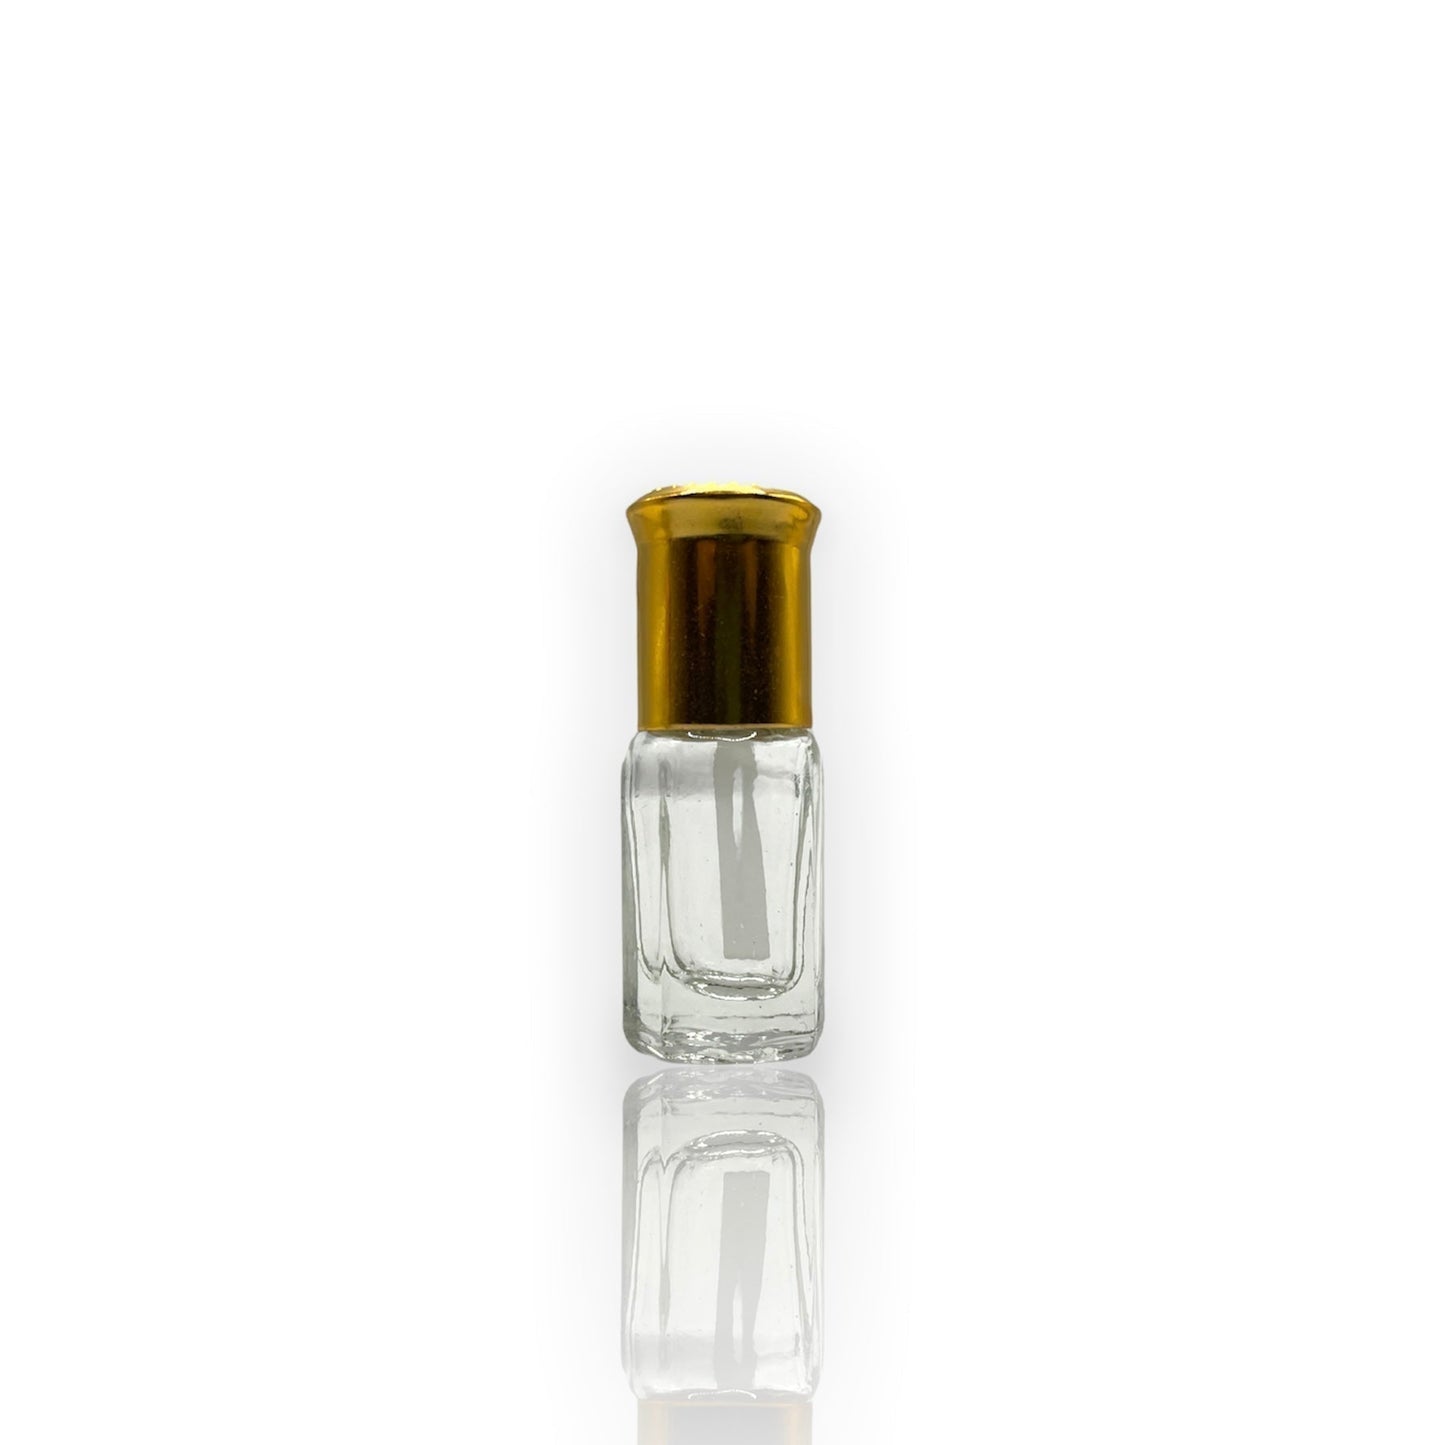 M-16 Oil Perfume *Inspired By VIP 212